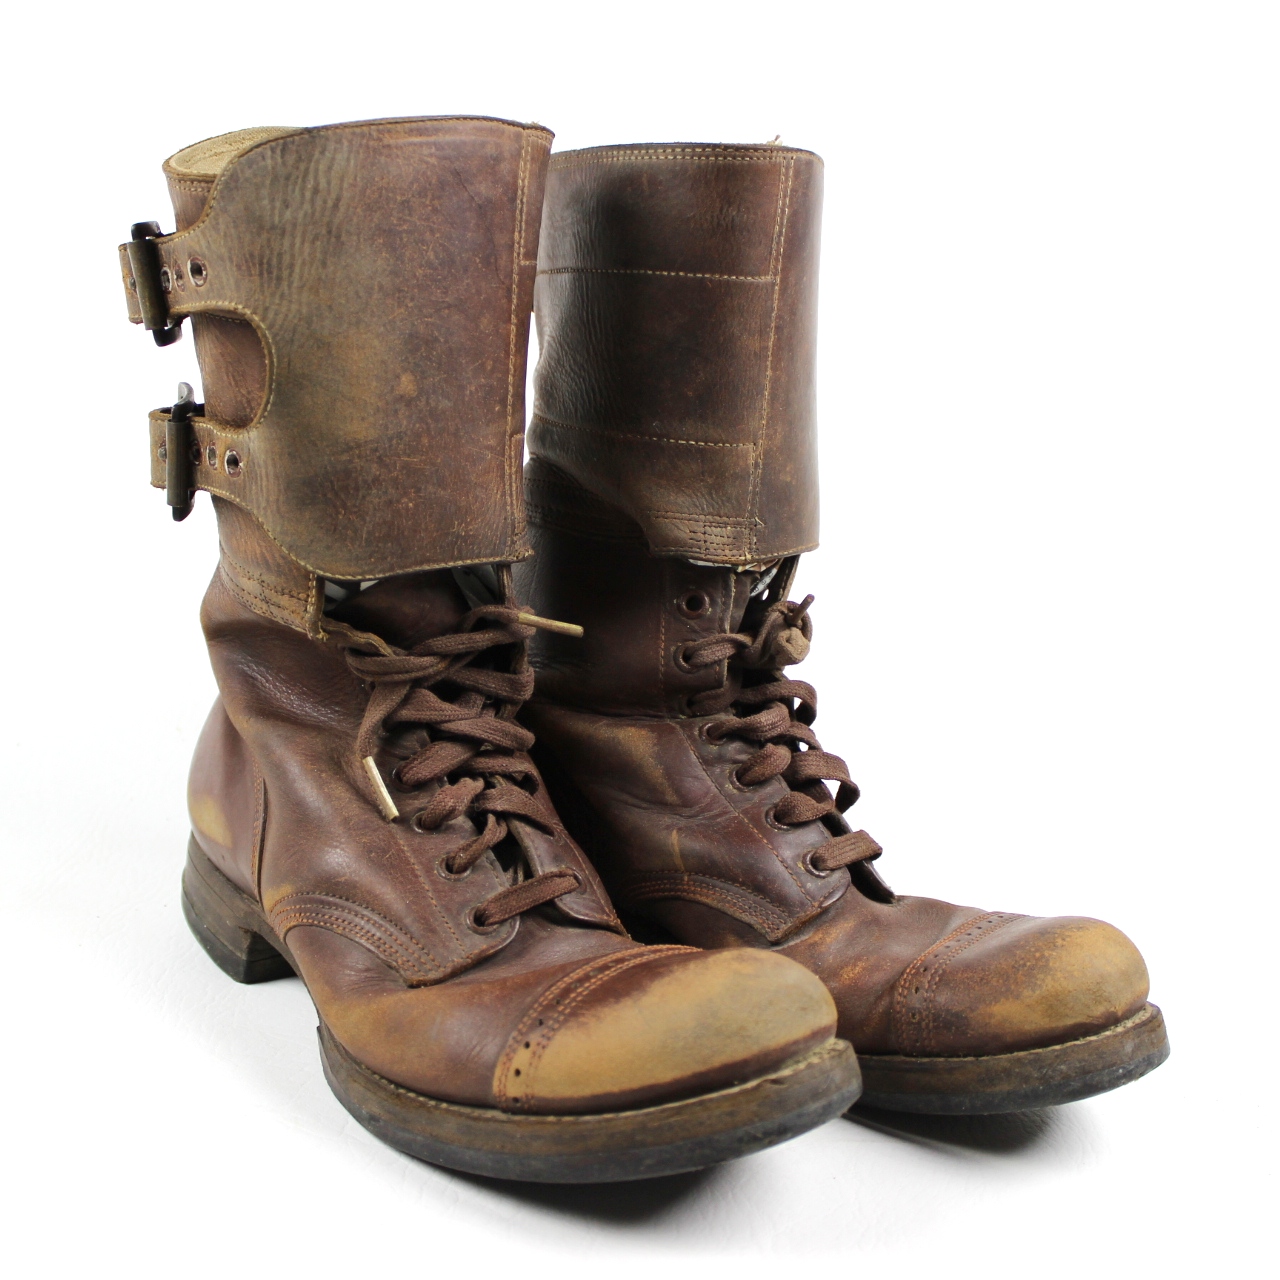 44th Collectors Avenue - Early M43 double buckle boots w/ toe cap - 8 1/2 E